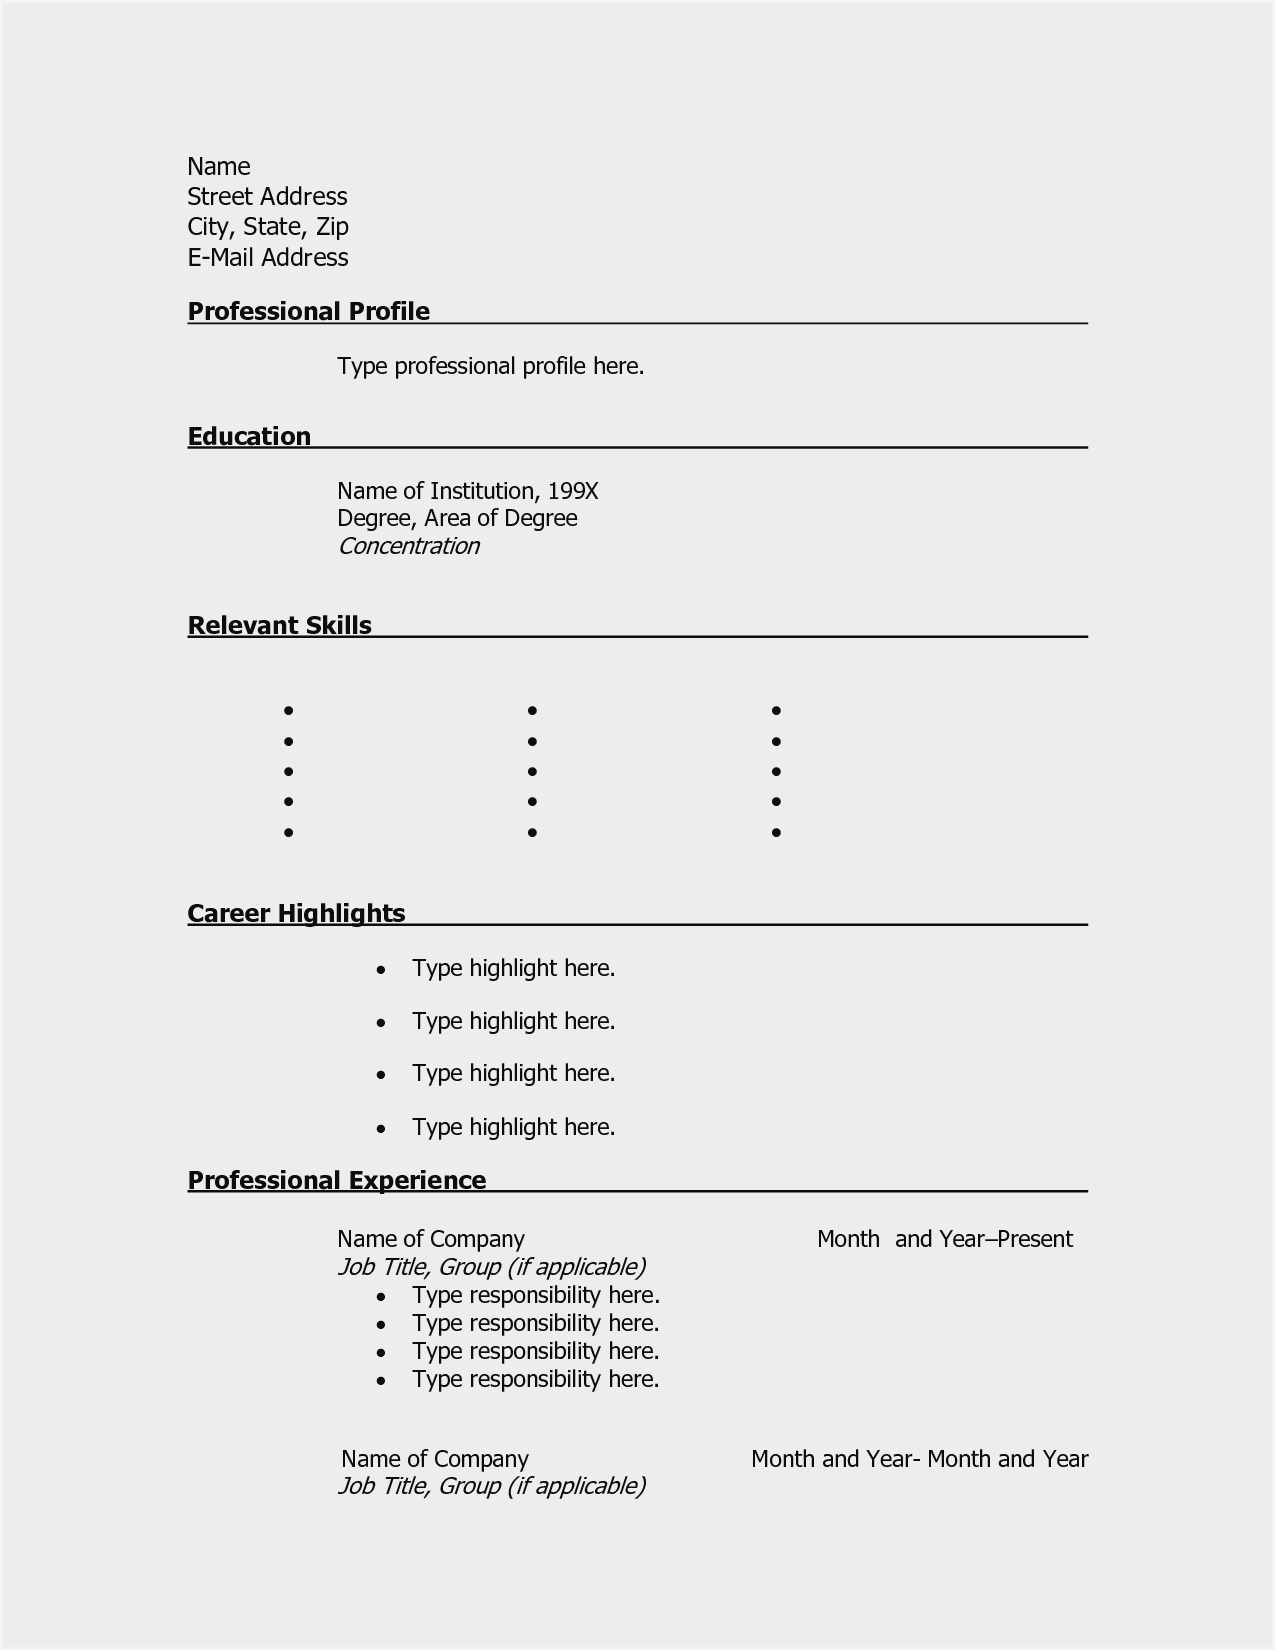 Blank Cv Format Word Download – Resume : Resume Sample #3945 Throughout Blank Resume Templates For Microsoft Word